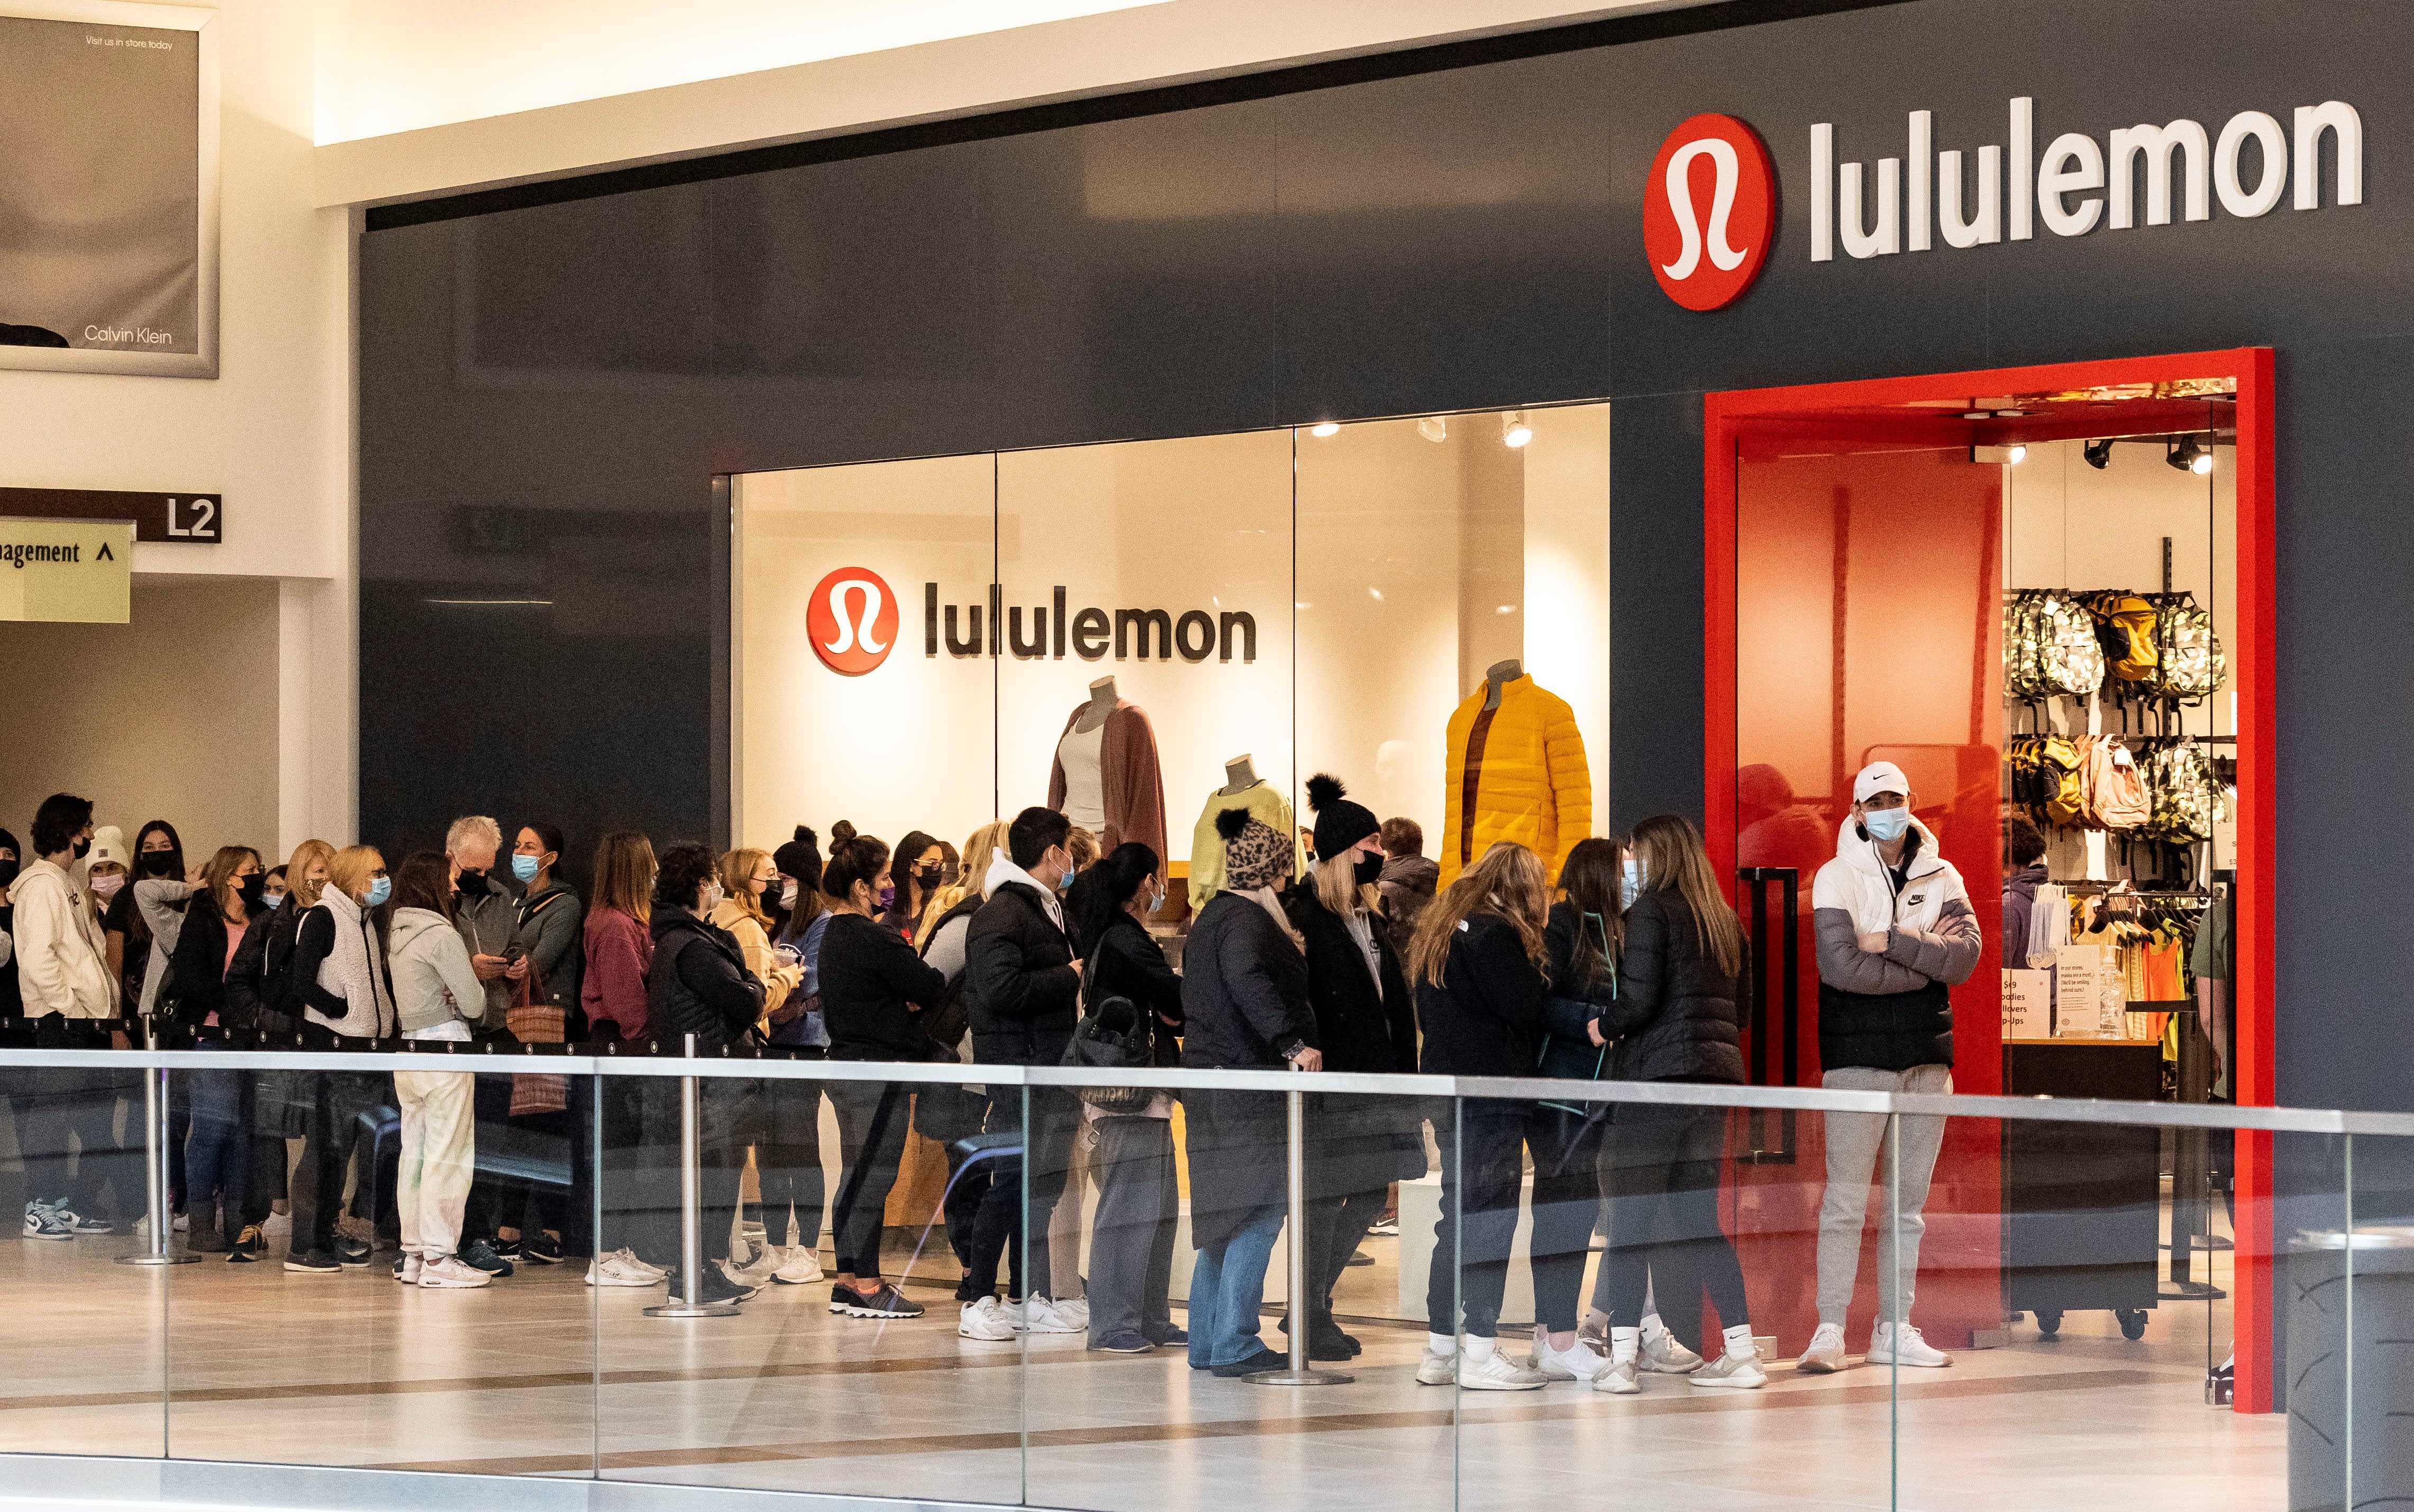 Lululemon earnings top estimates but shares fall after retailer cuts forecast for Mirror sales – CNBC